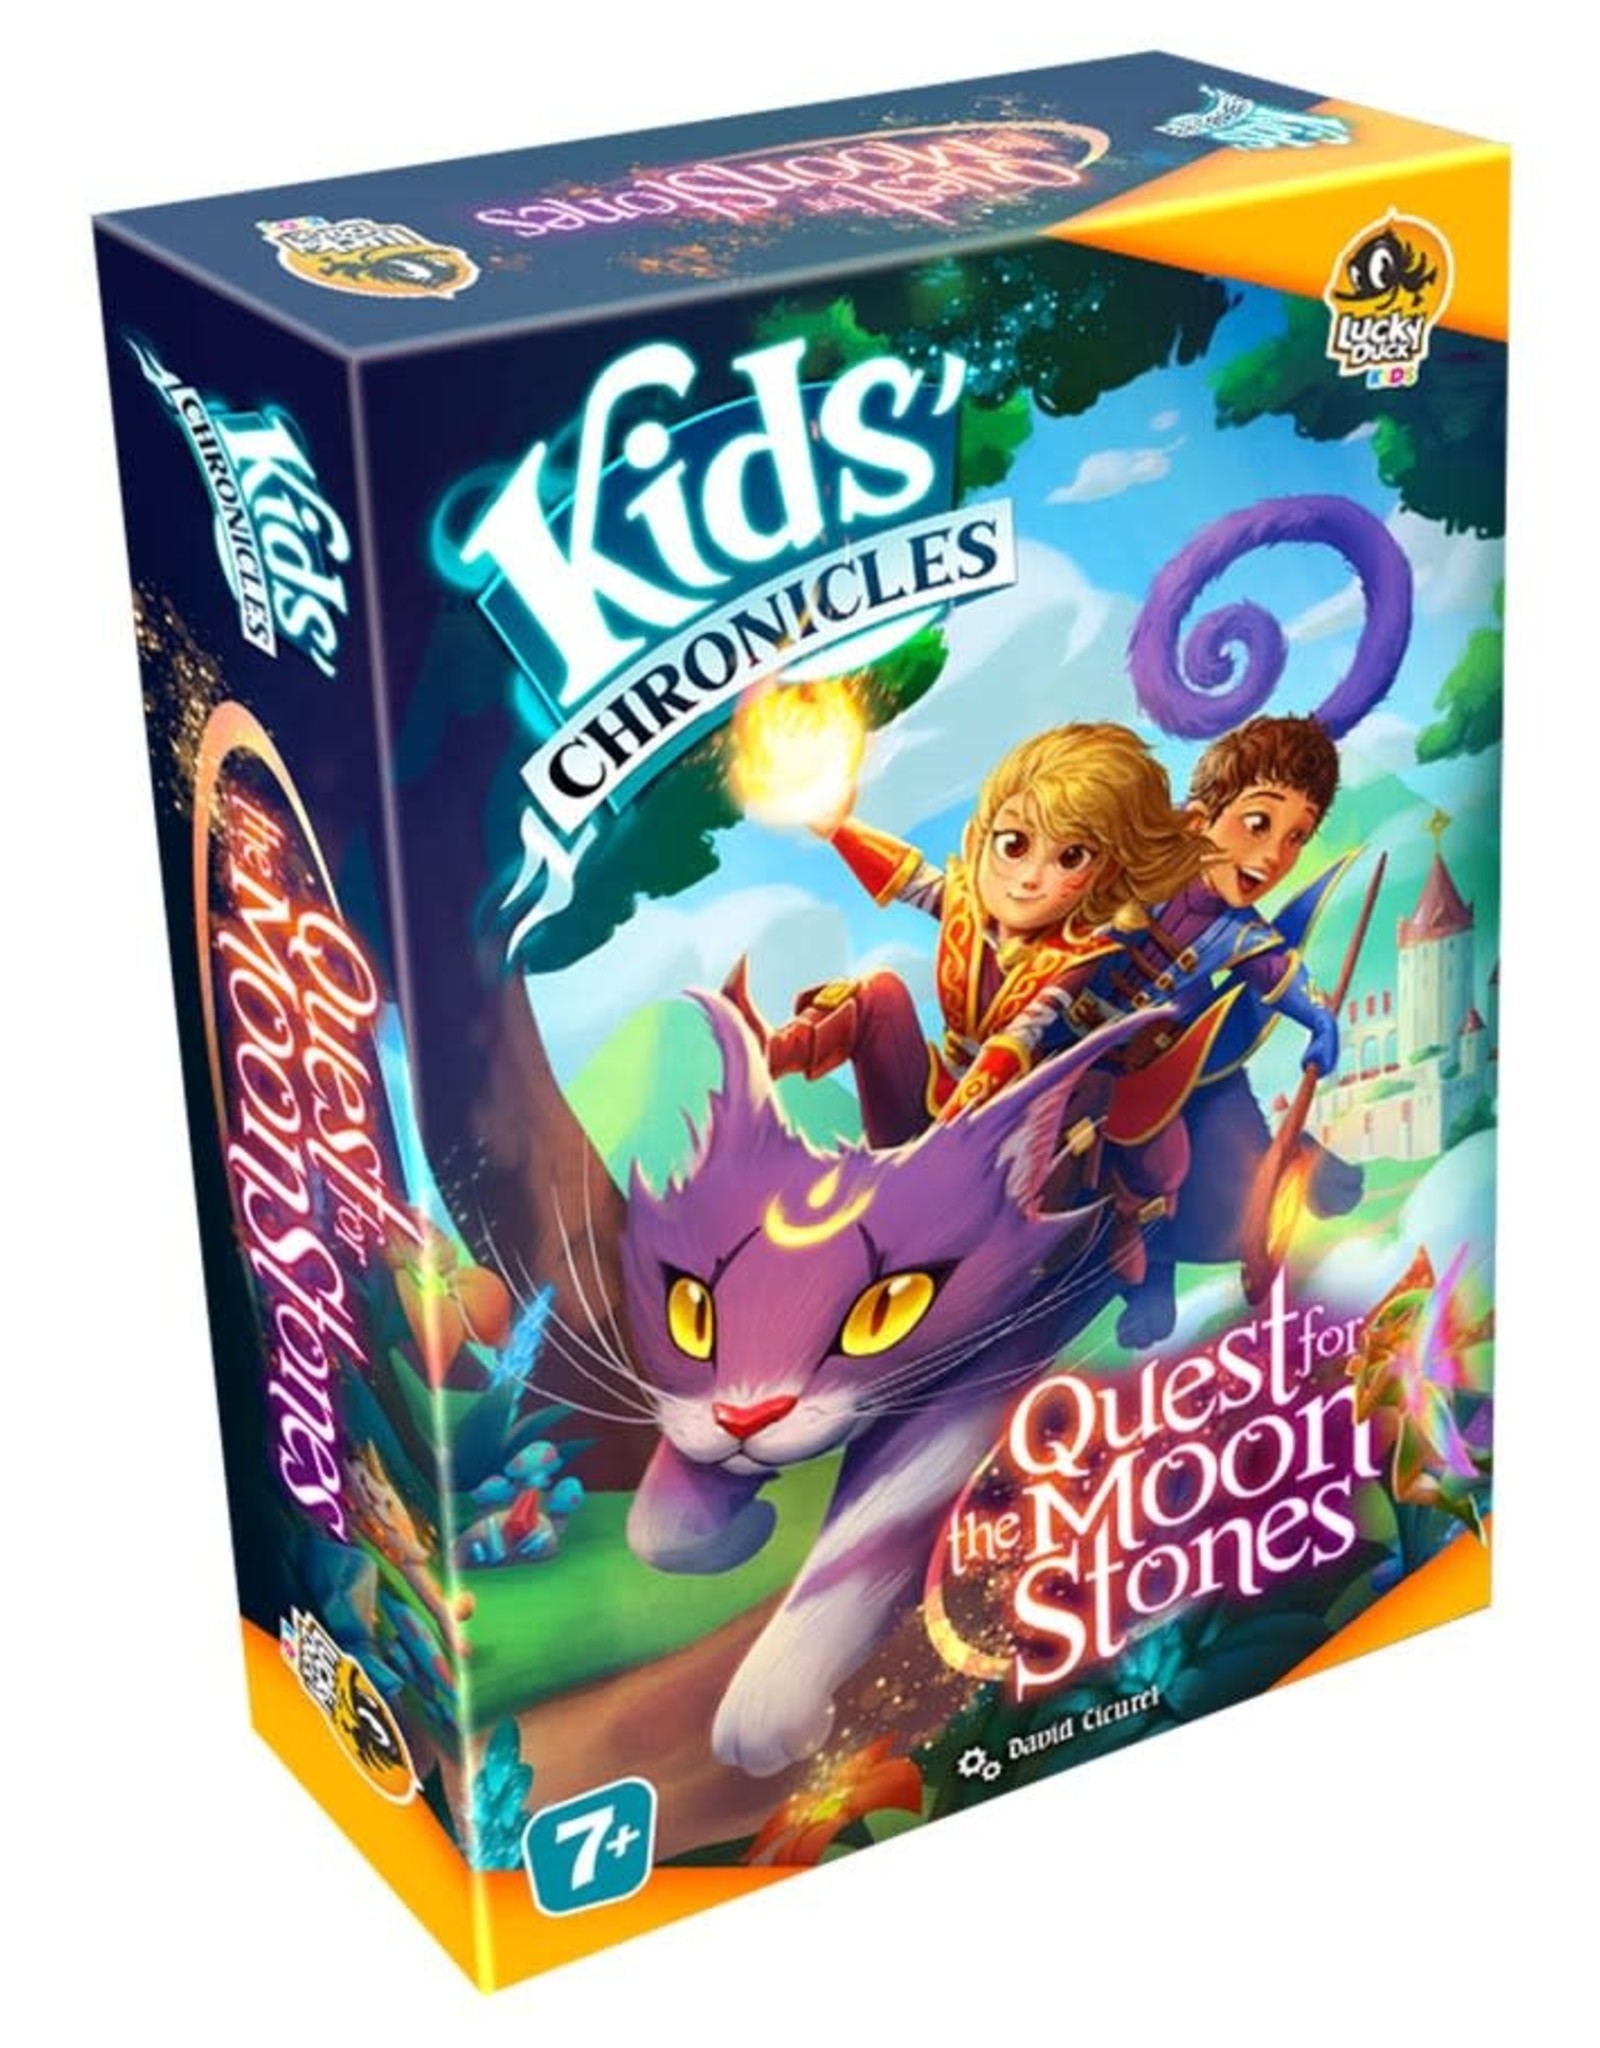 Lucky Duck Games Kids' Chronicles Quest for the Moon Stones